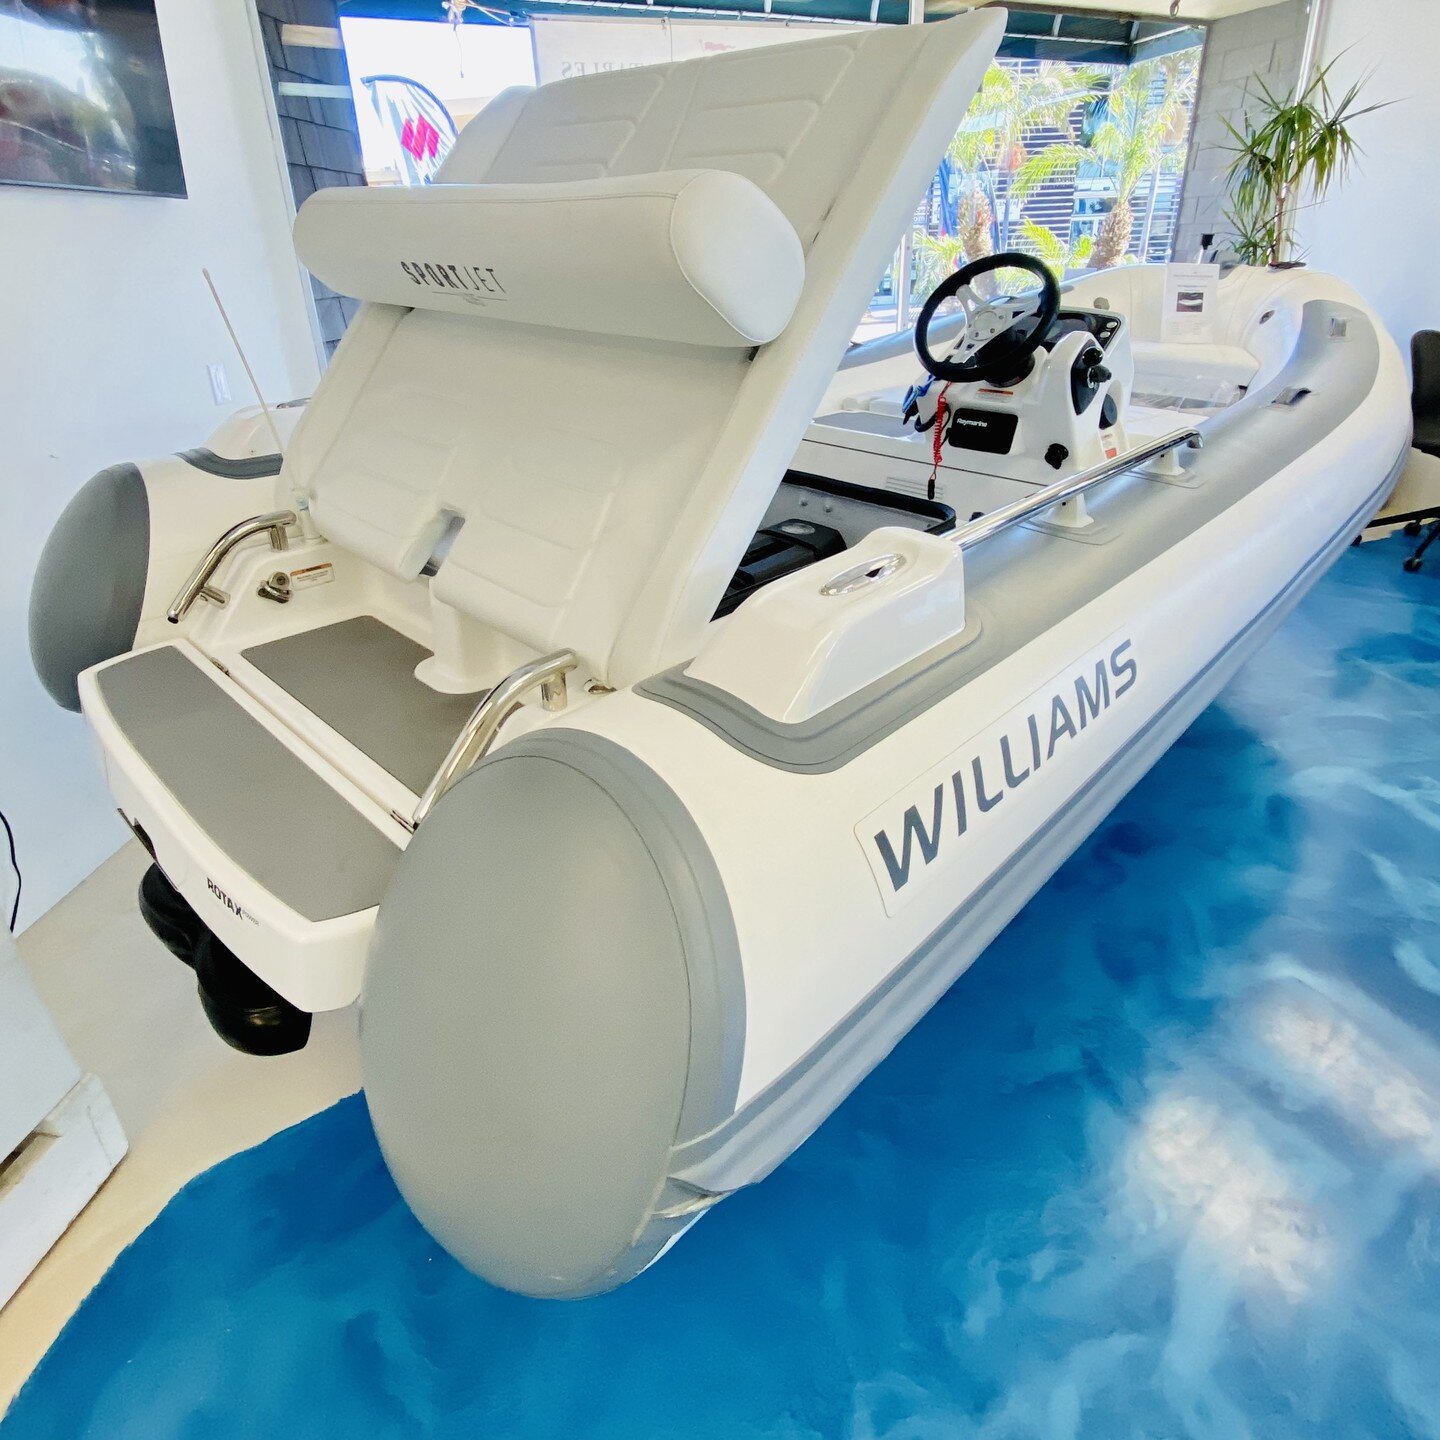 Loaded Williams Sport Jet 435 w/ 130 HP Rotex engine.
Easter Weekend Special - $74,950
Call Shelter Island Inflatables @ 619.222.1200

#shelterislandsandiego #easter2023 #williamsjettenders #rotex #tenders #sandiegocalifornia #inflatableboats